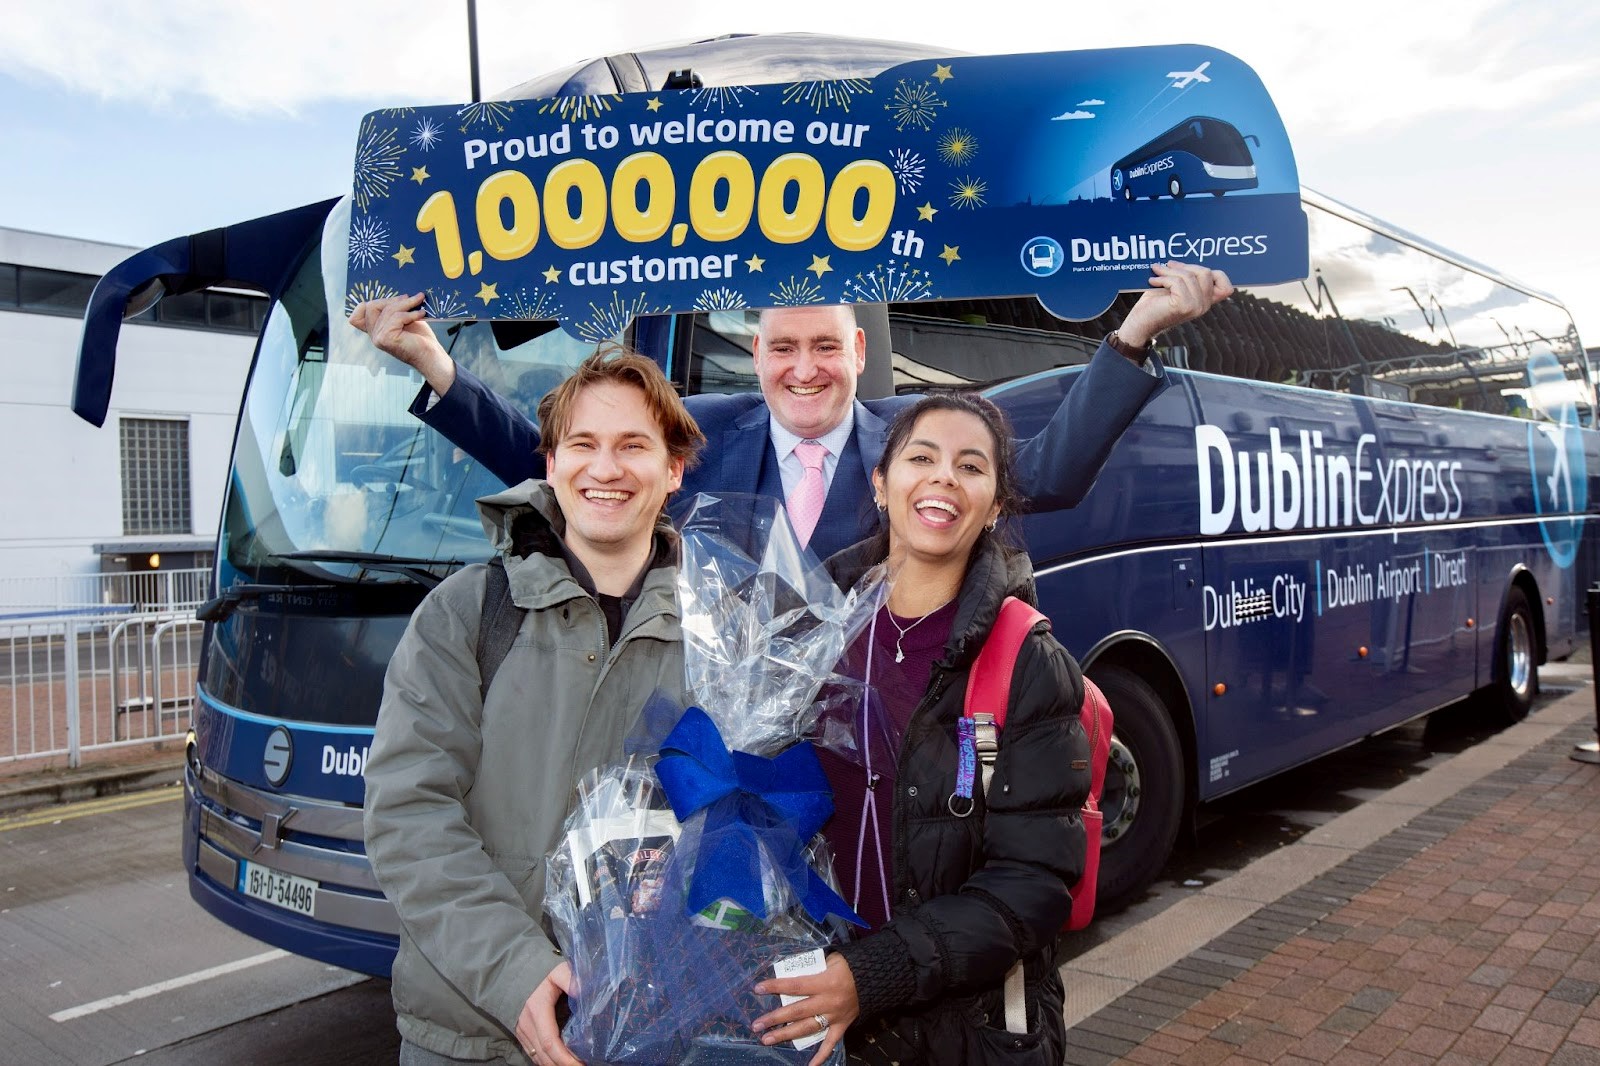 Dublin Express welcomes one-millionth customer